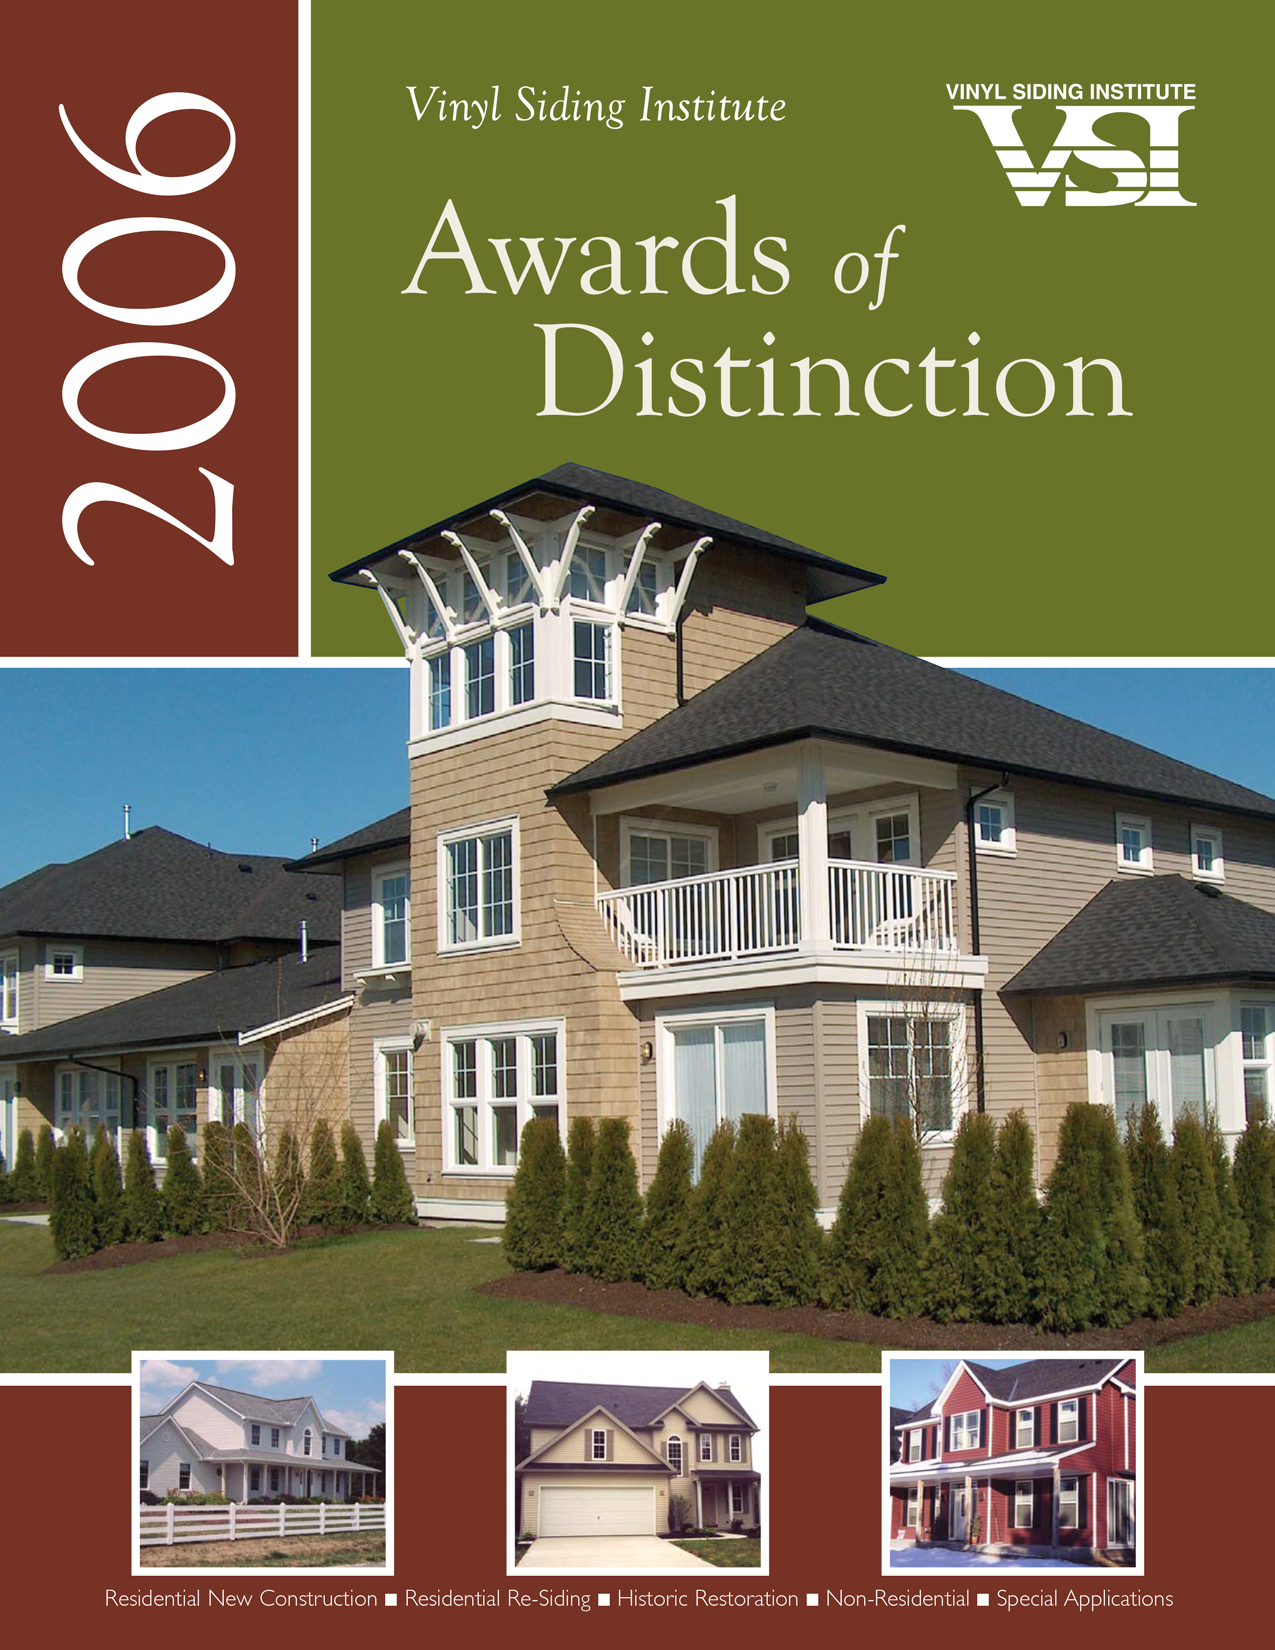 Vinyl Siding Institute Award of Distinction for Special Applications presented to Structural Restoration Services, Inc